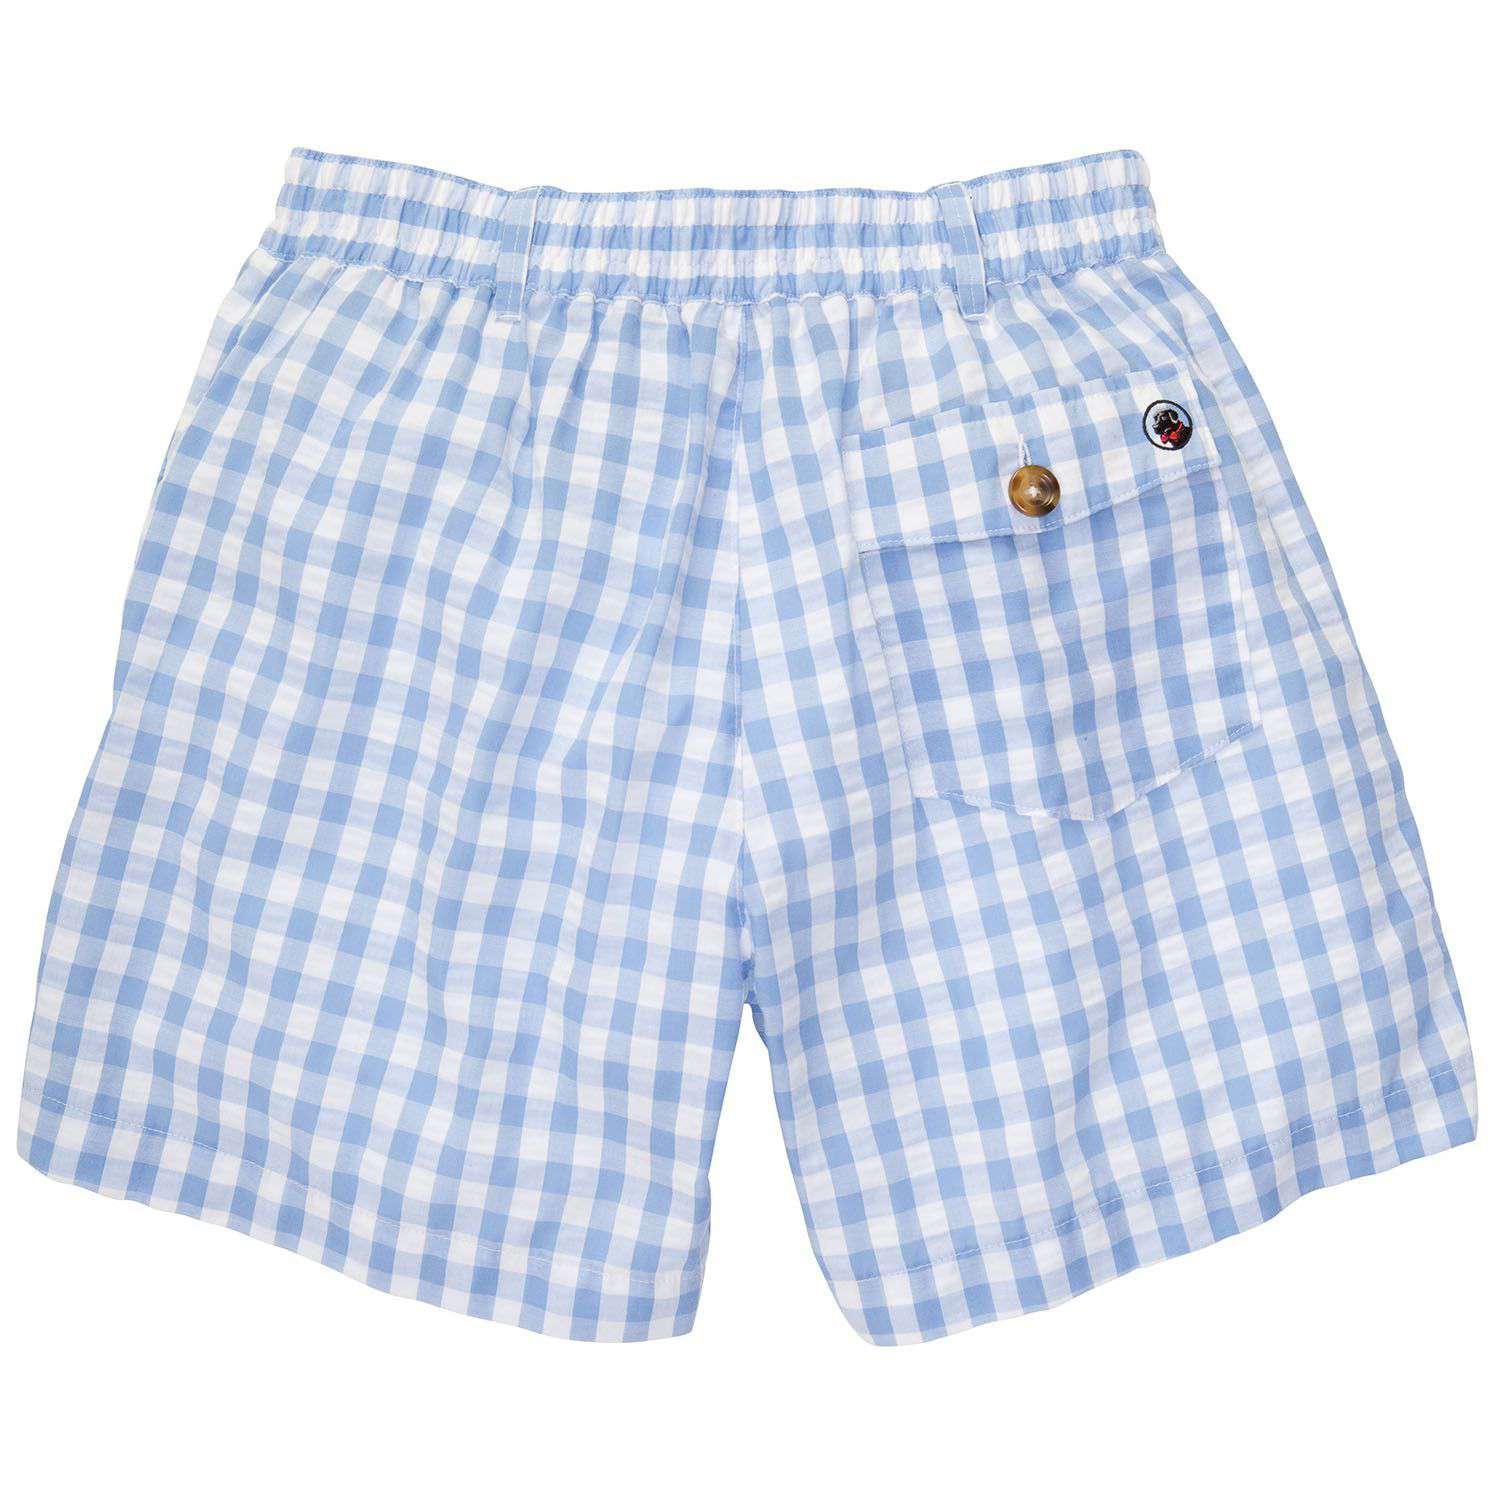 Southern Proper Blue and White Seersucker Shorts